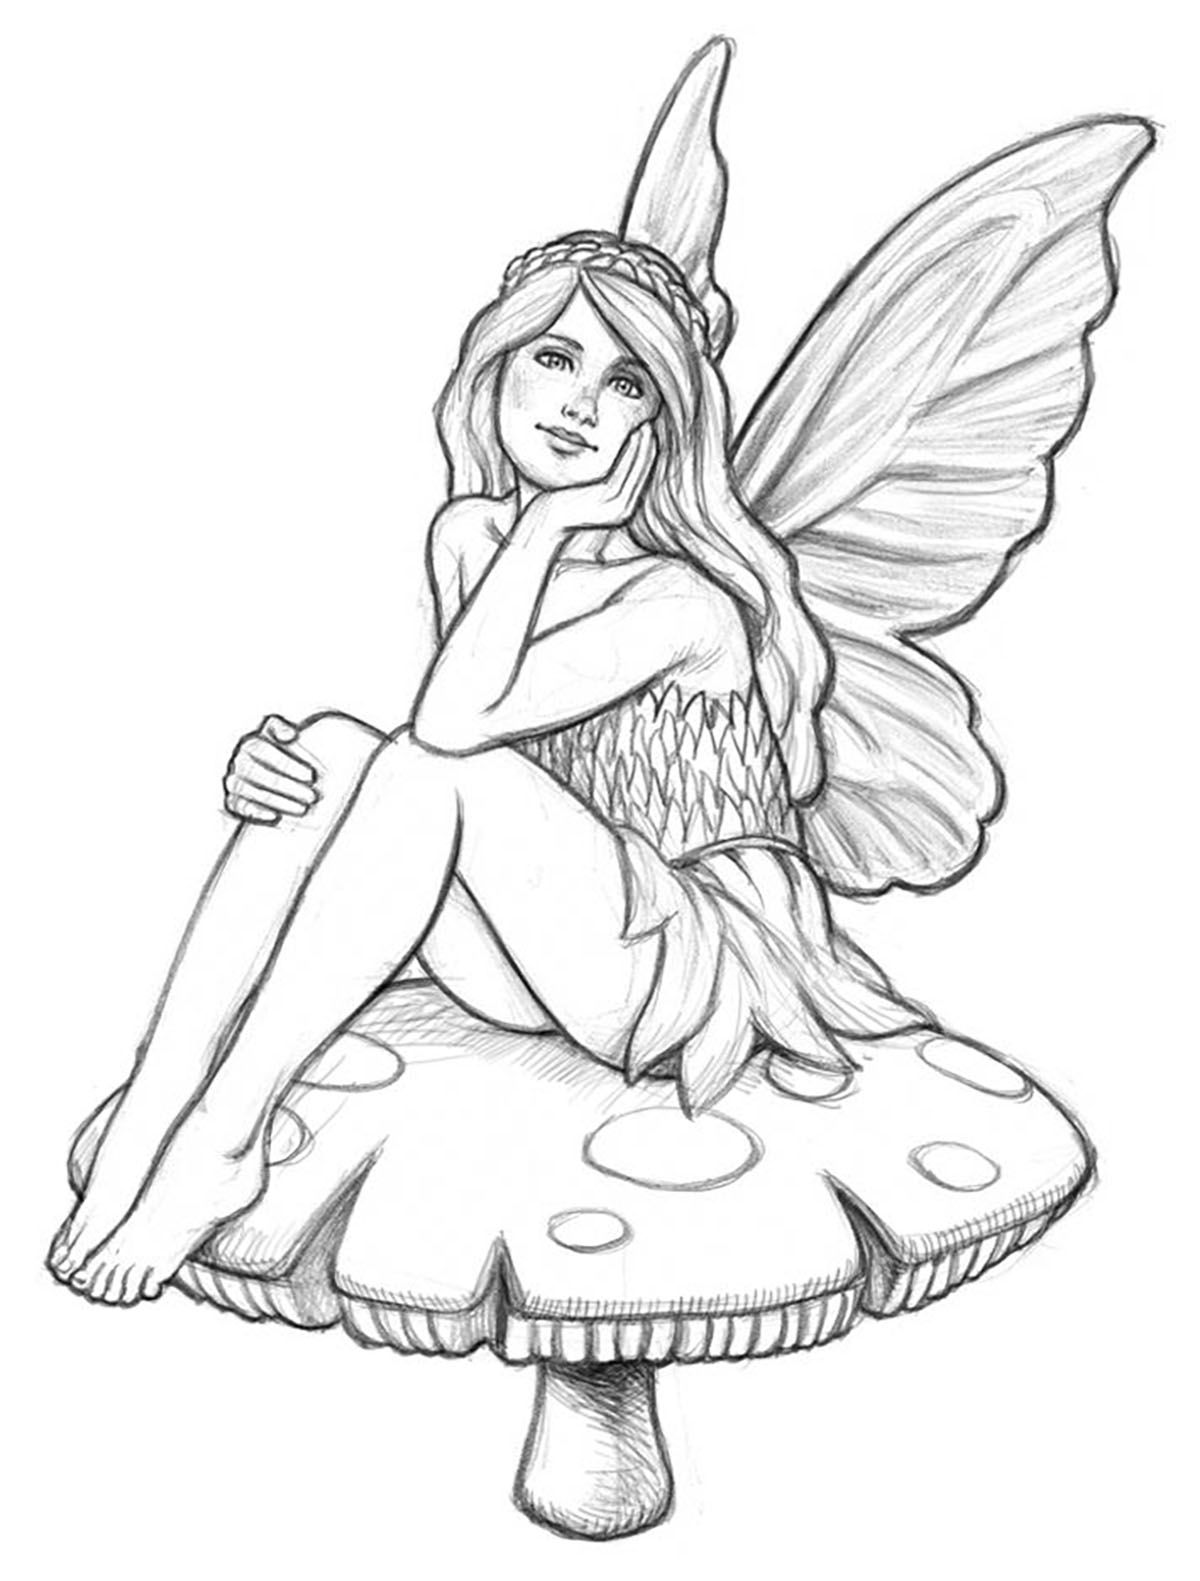 Coloring page fairy in her dreams